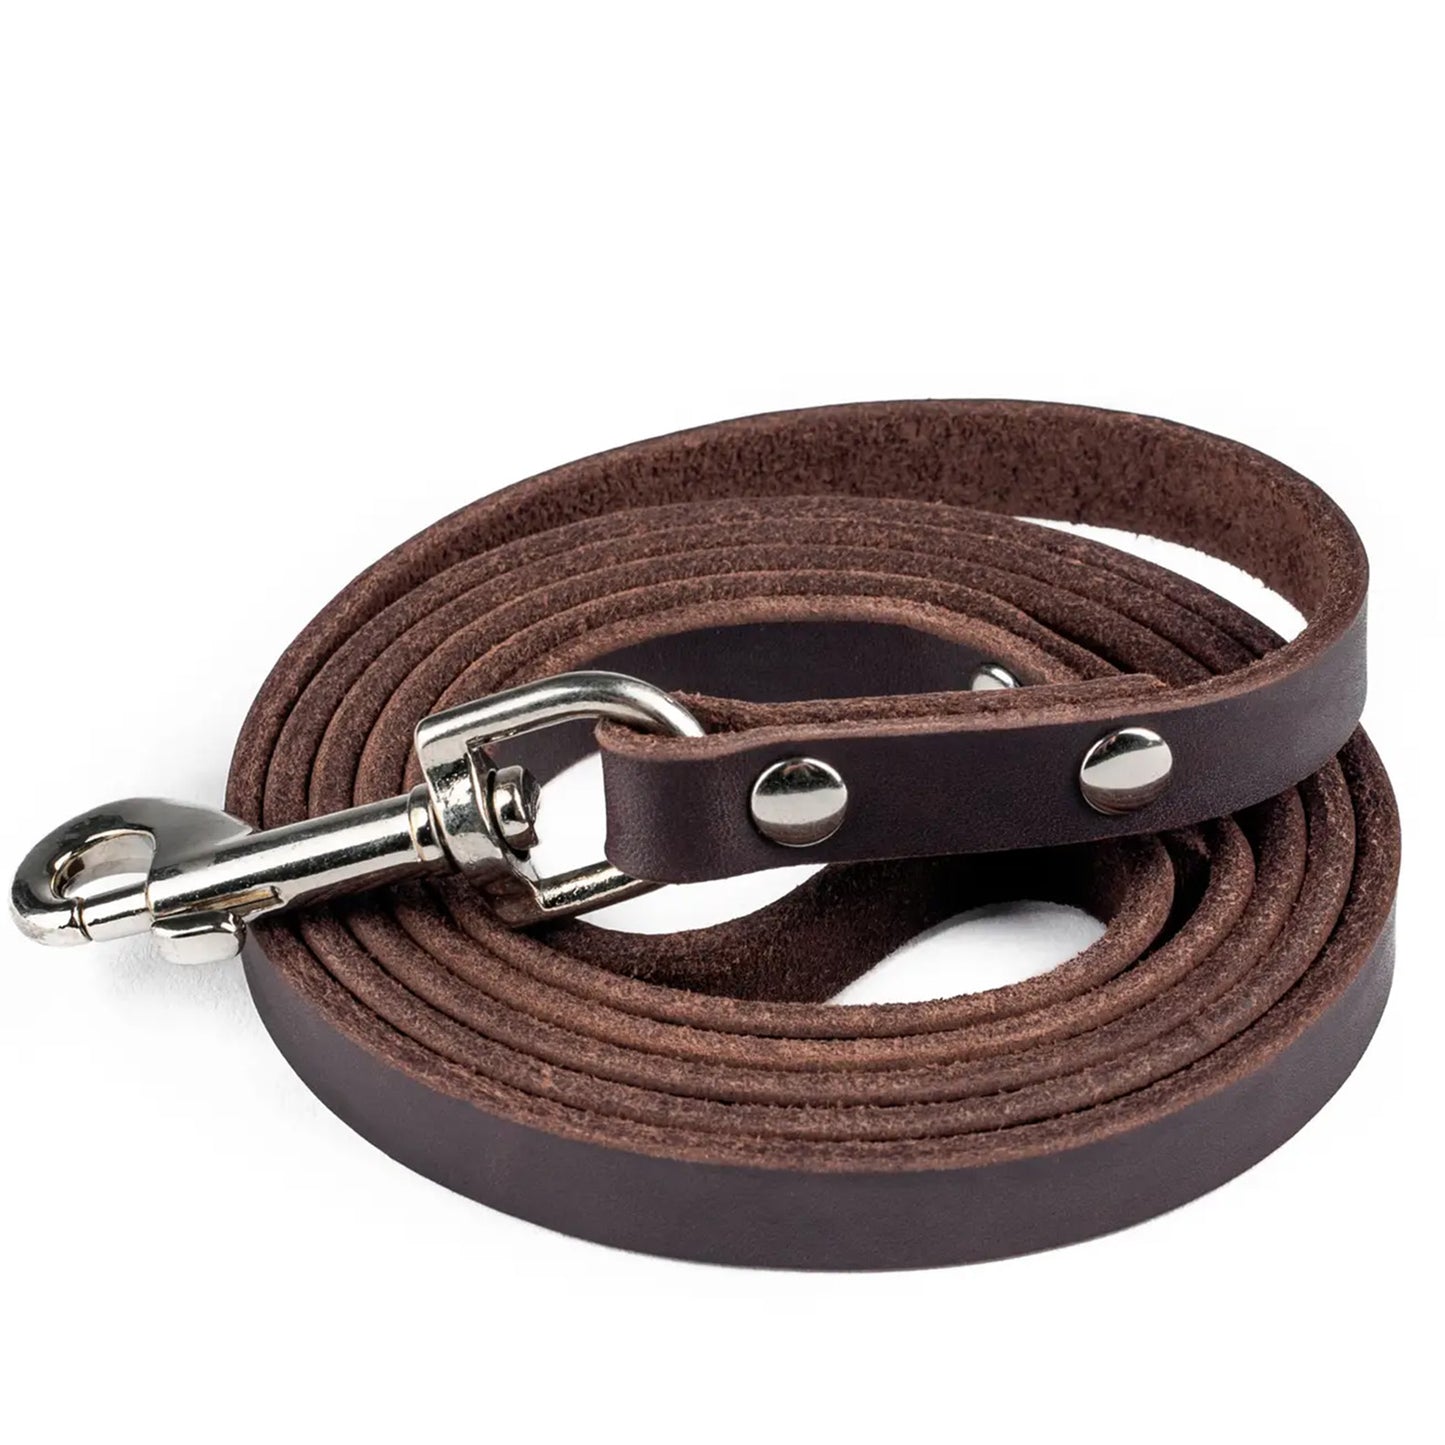 Leather Leash by Mighty Paw